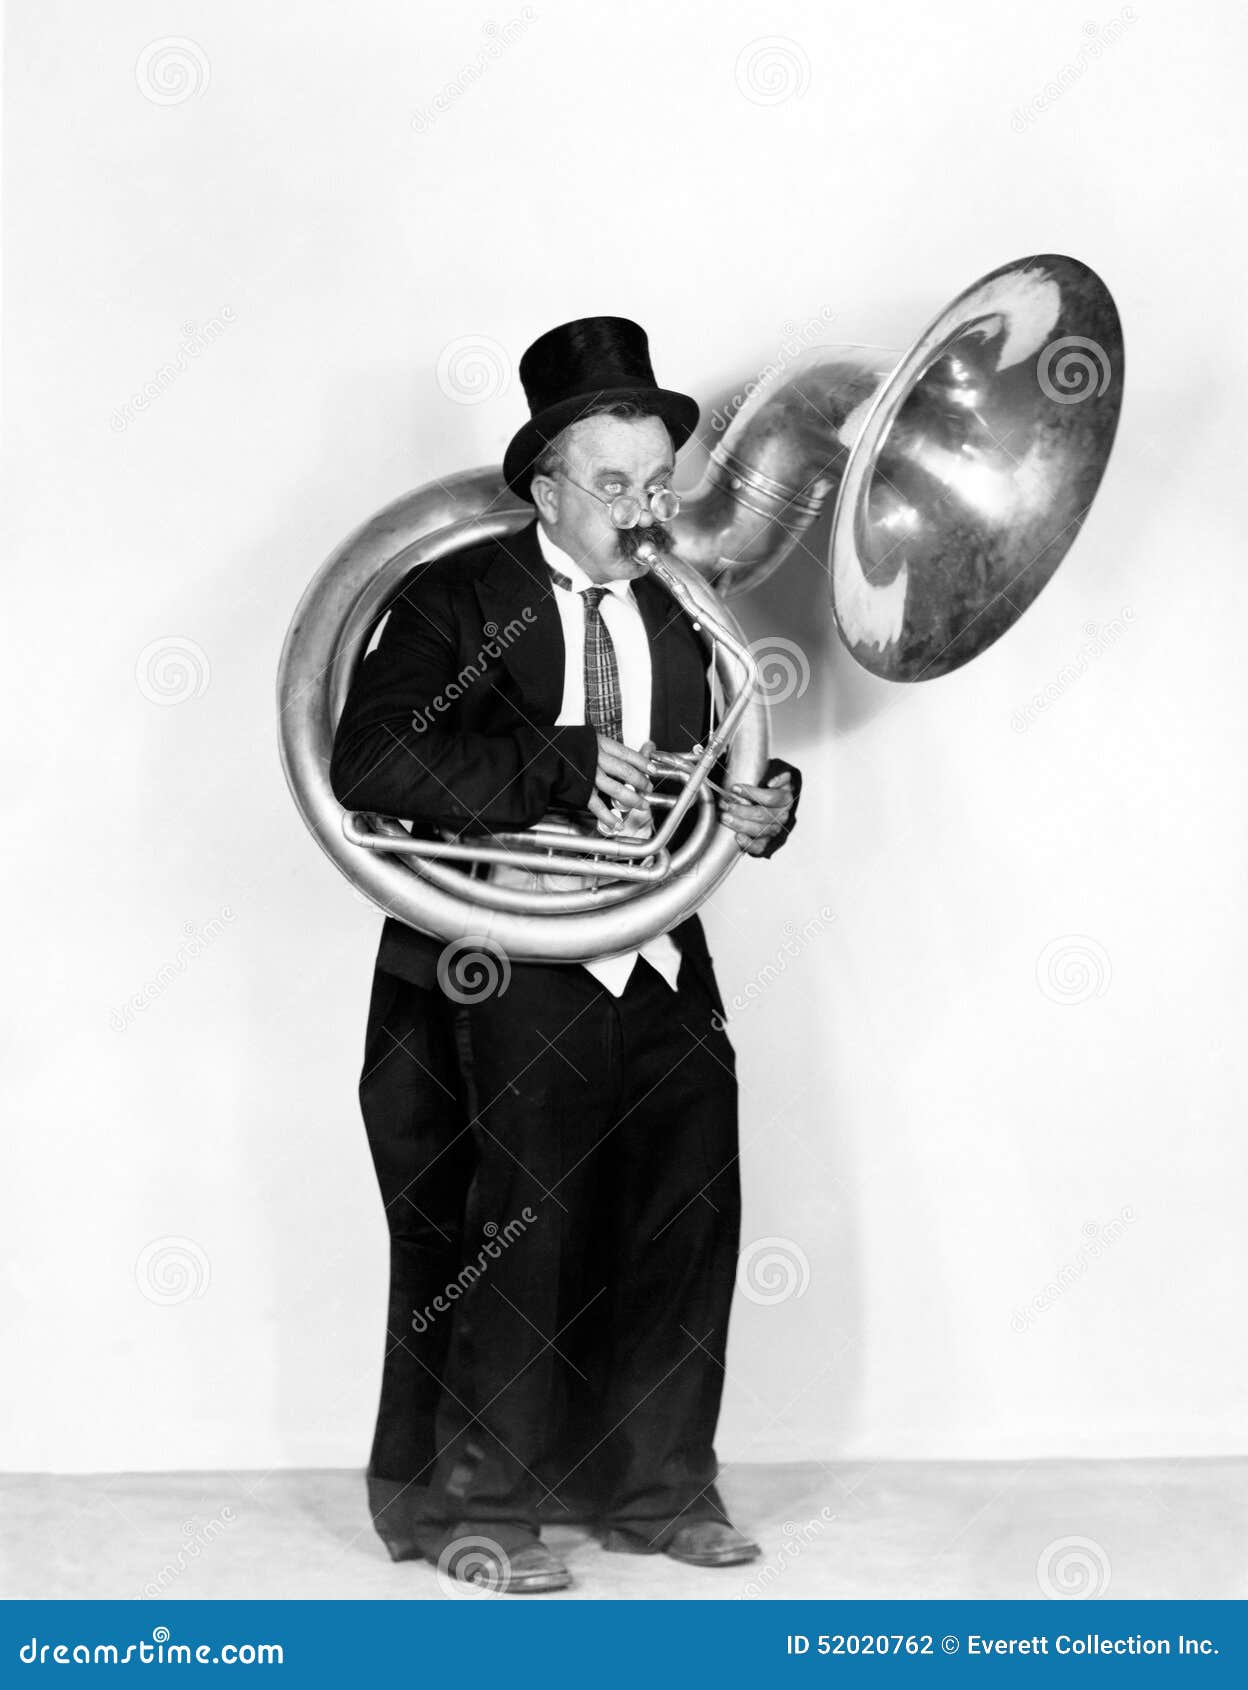 man playing a tuba in a top hat